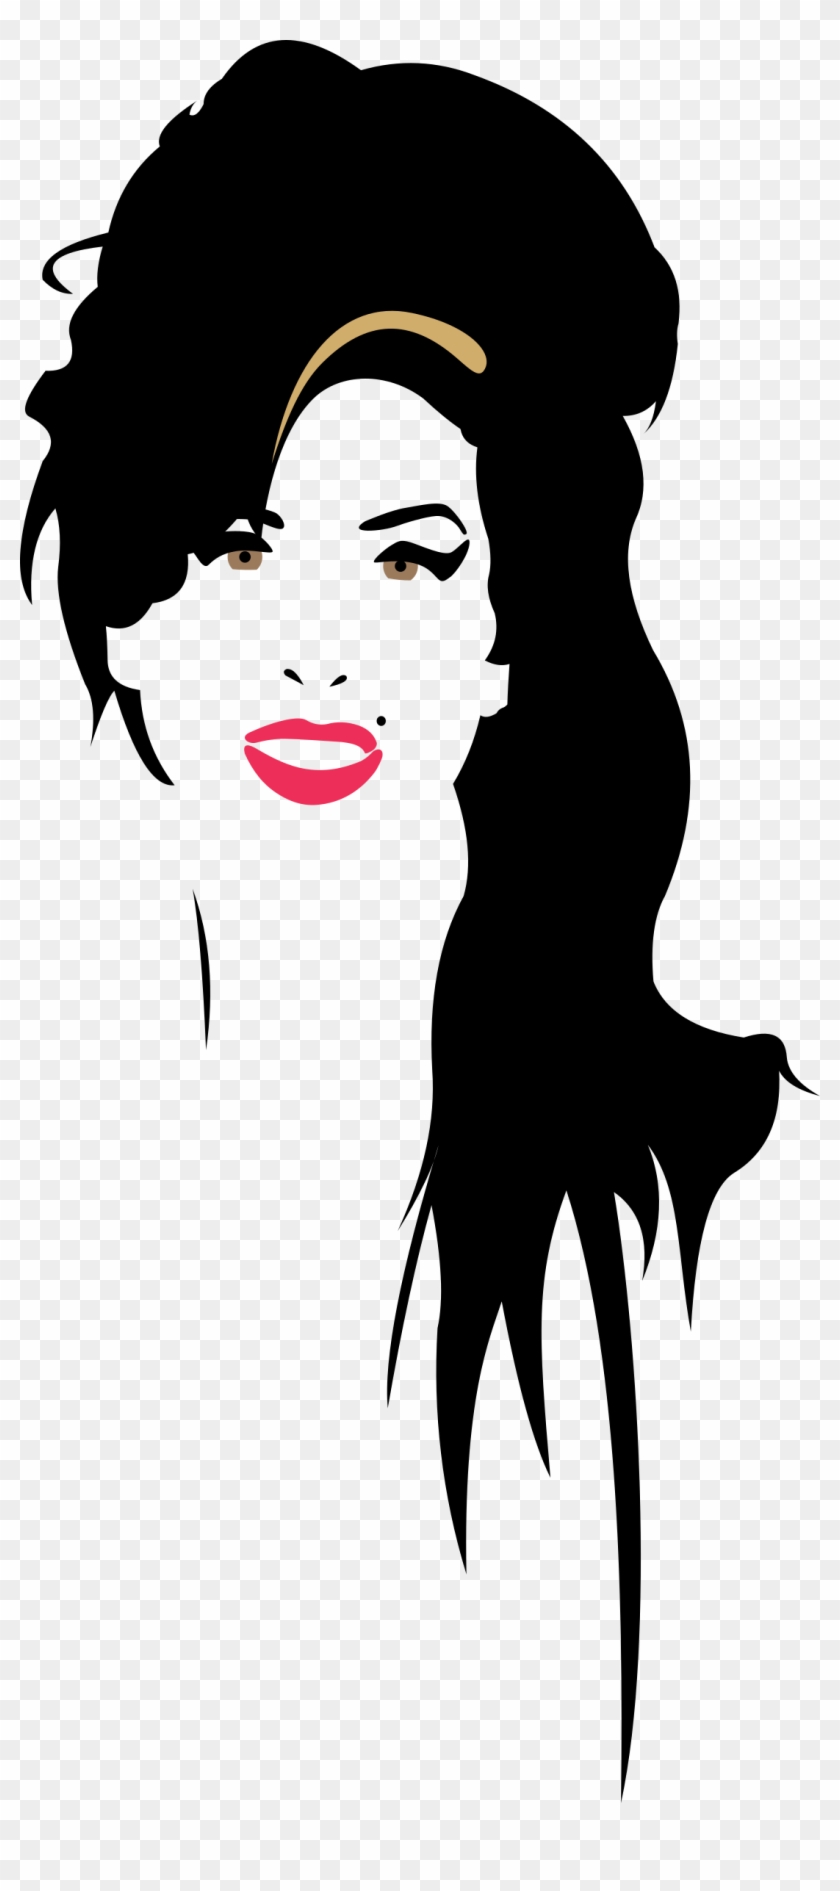 Amy Winehouse Clipart - Amy Winehouse Png Transparent Png #1279220